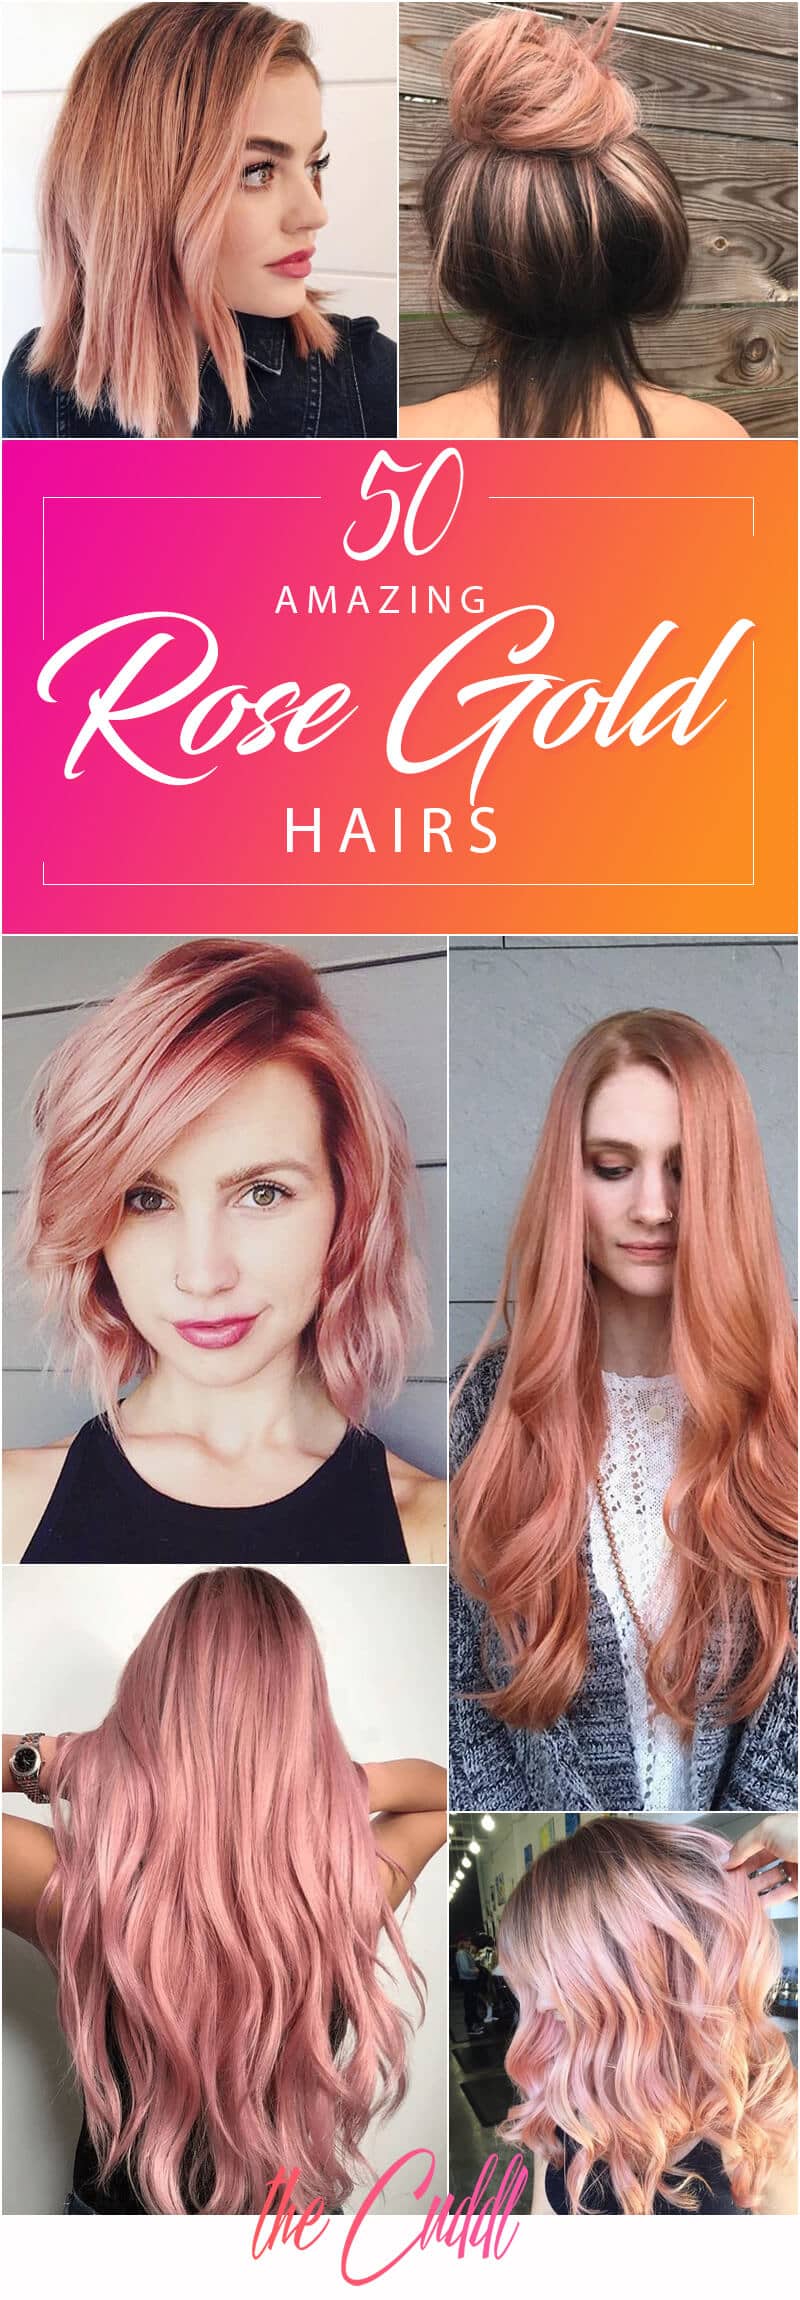 50 Irresistible Rose Gold Hair Color Ideas That Prove You Can Pull Off This Trend